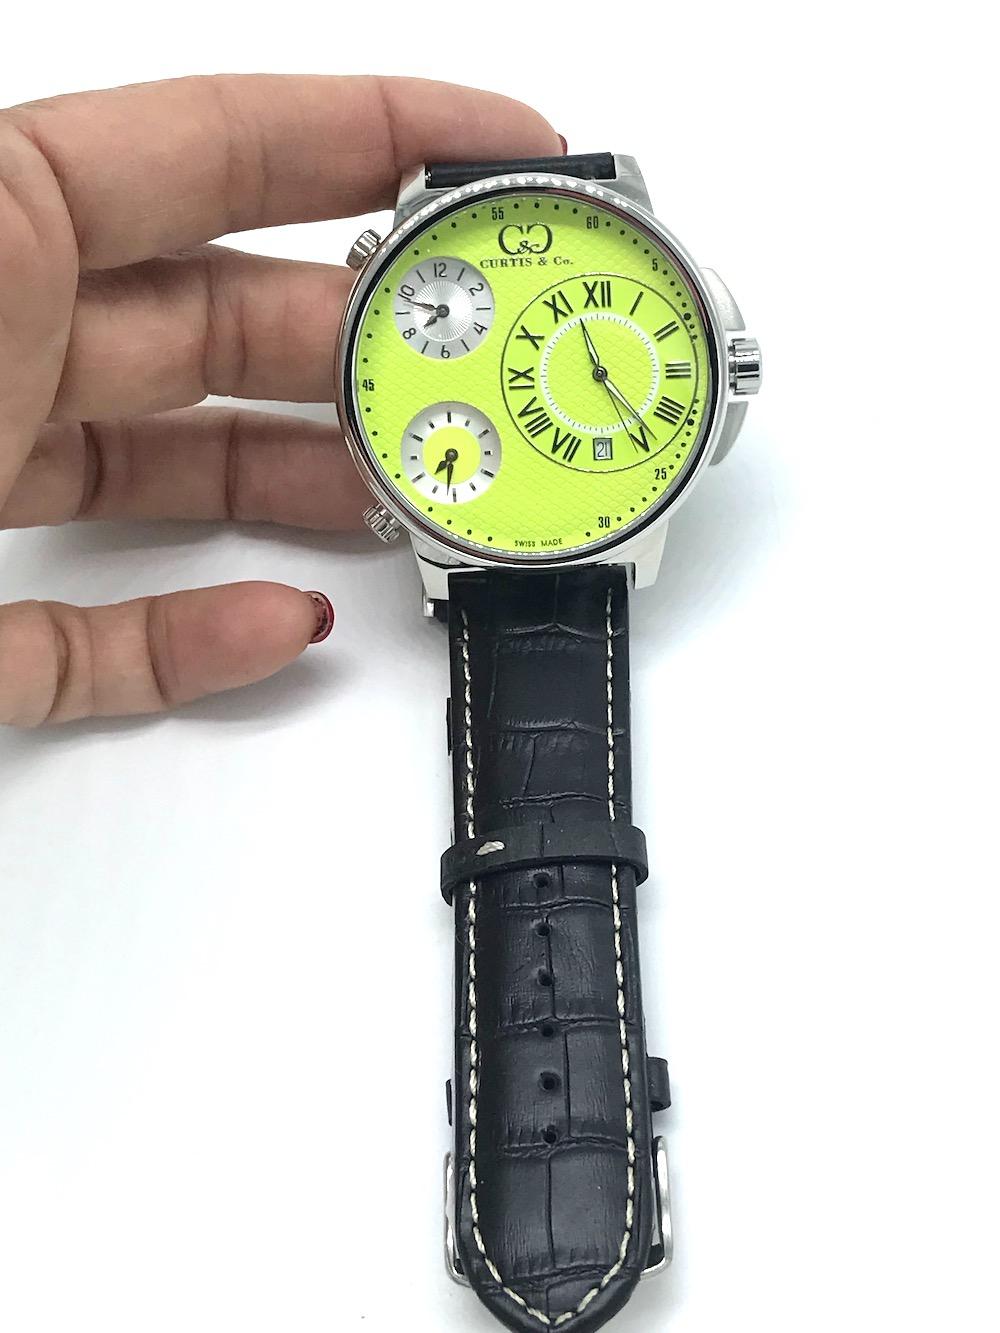 Curtis and Co Watch, 57 mm Big Time Air, 3 Time Zone 
Swiss made. New condition, never worn, 30 mm green colored dial with 3 time zones. Black strap. 57 mm includes outside buttons. Set watch to 3 different time zones includes date calendar. Quartz,